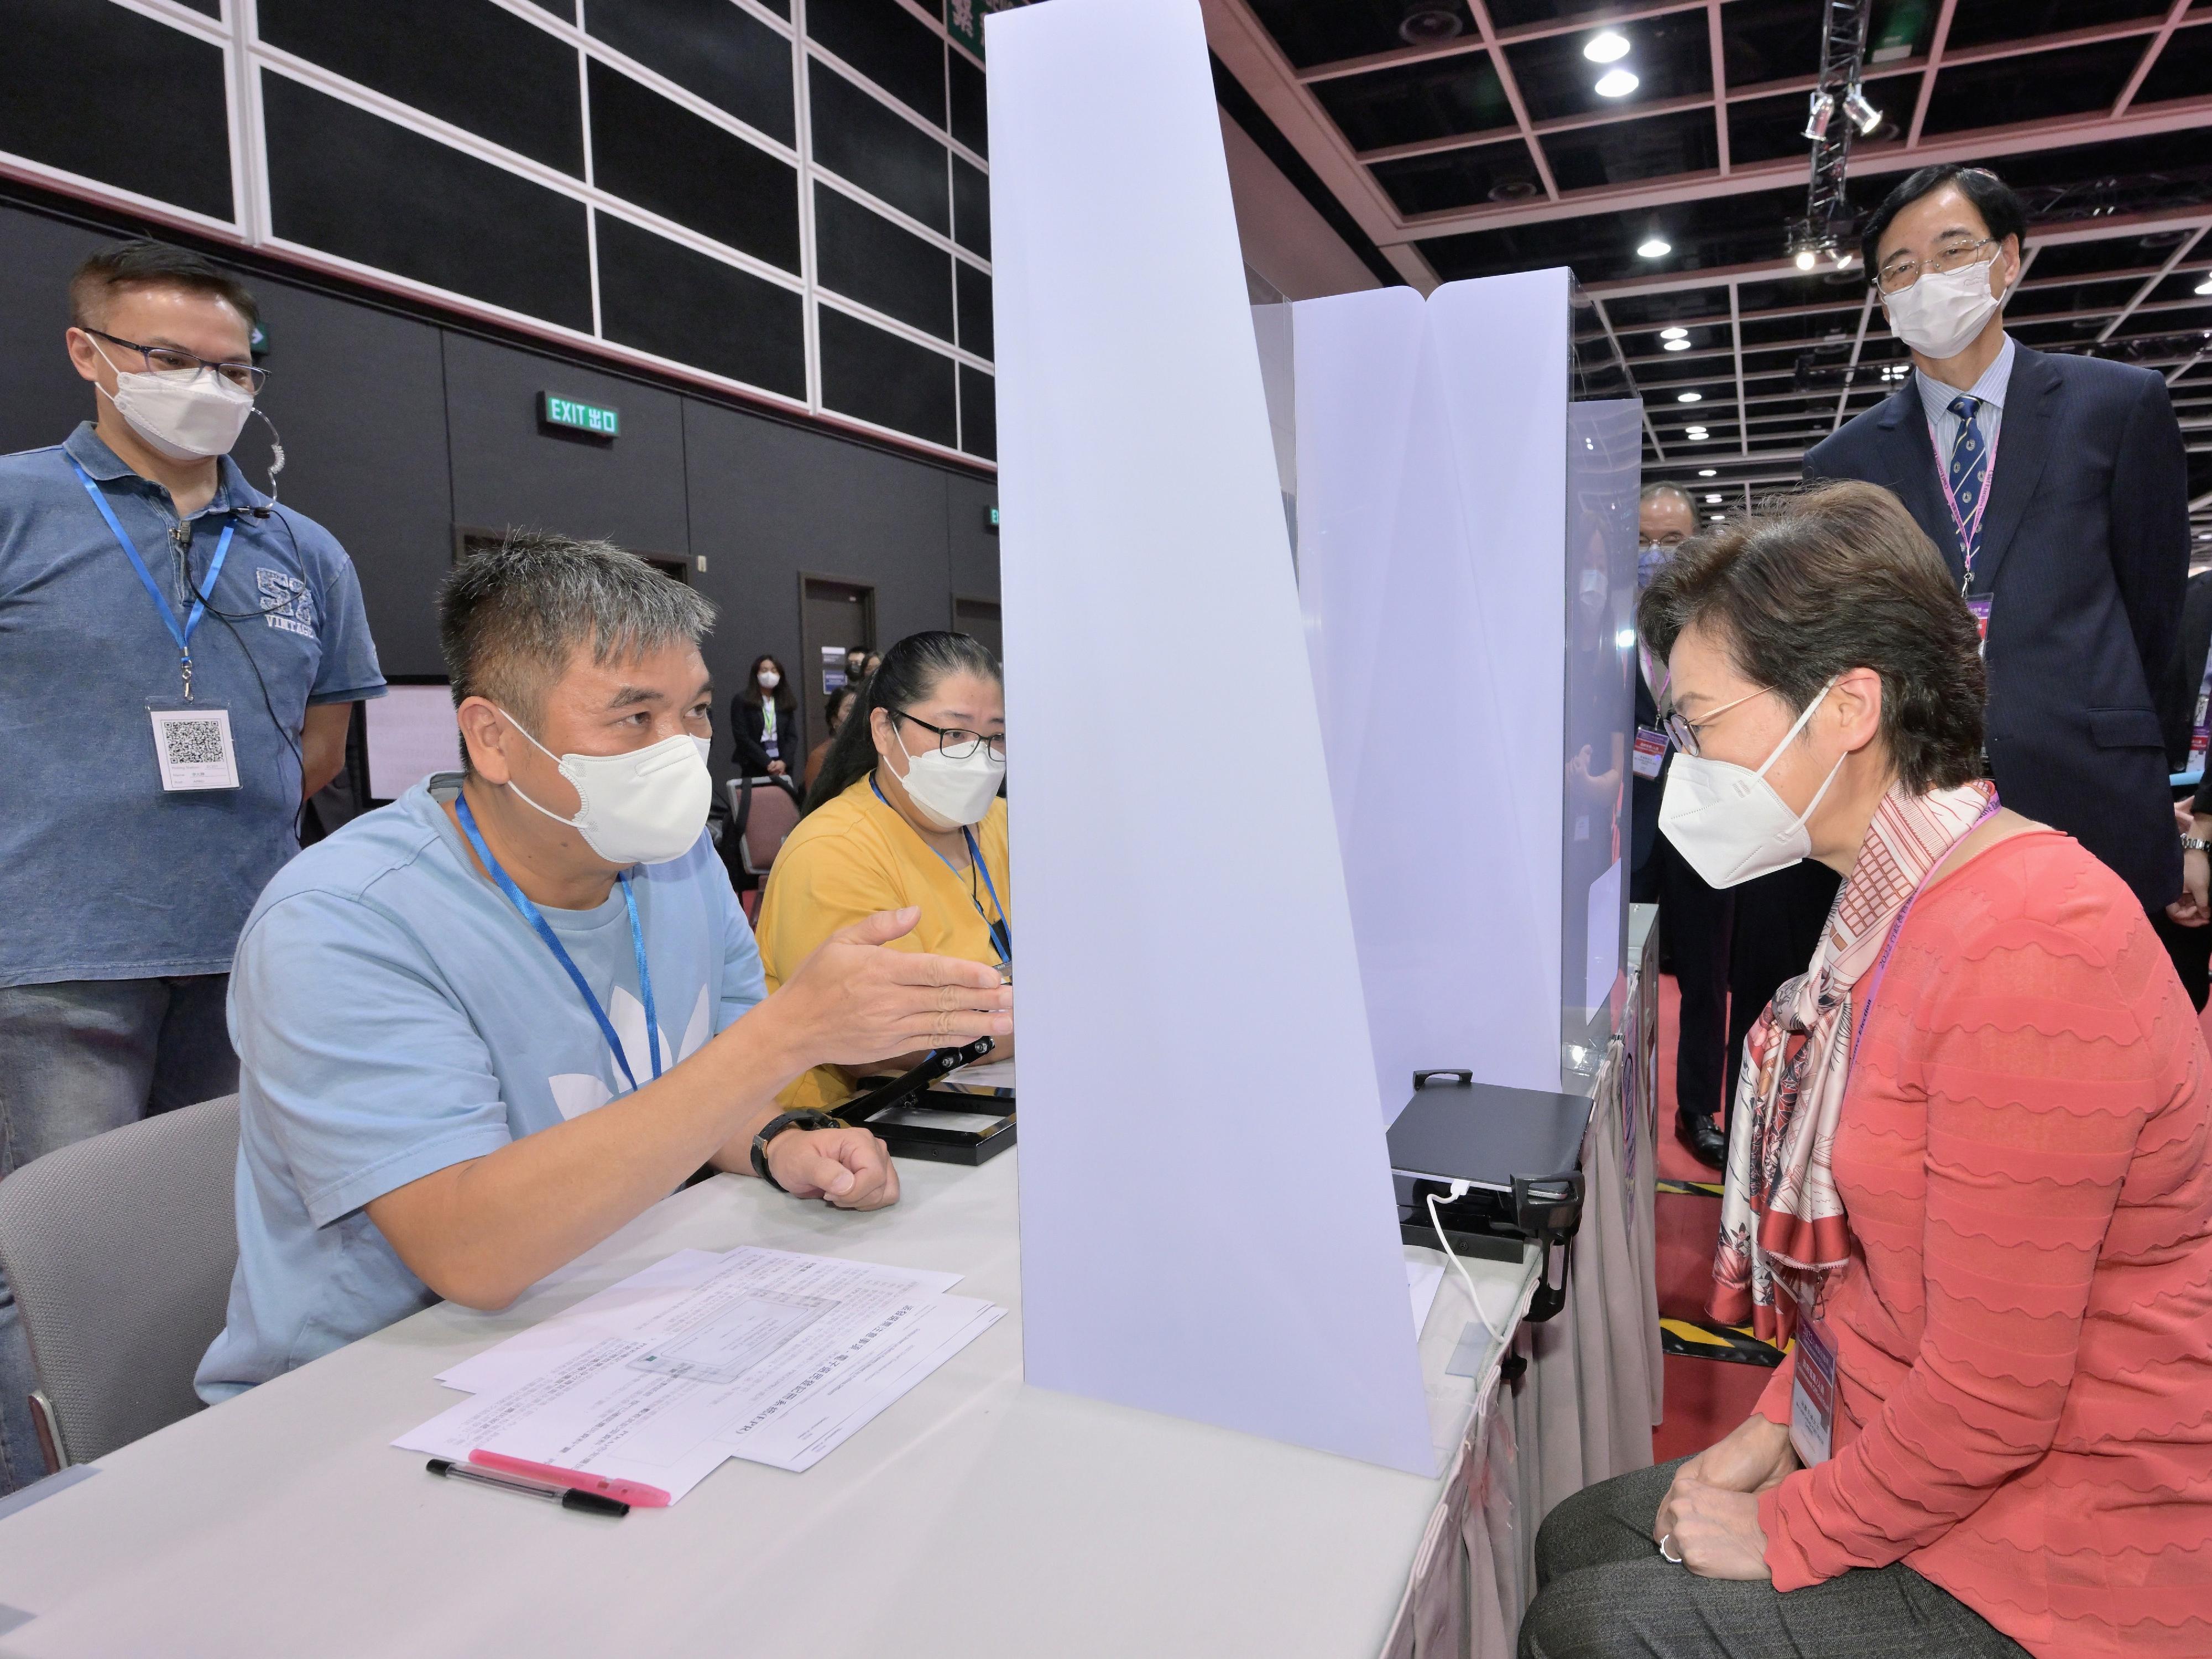 The Chief Executive, Mrs Carrie Lam (right), accompanied by the Secretary for Constitutional and Mainland Affairs, Mr Erick Tsang Kwok-wai, and the Chairman of the Electoral Affairs Commission, Mr Justice Barnabas Fung Wah, visits the main polling station and the central counting station of the Chief Executive Election at the Hong Kong Convention and Exhibition Centre this morning (May 7) to learn more about the final stage of the preparatory work for the election. Photo shows Mrs Lam experiencing the voting process.